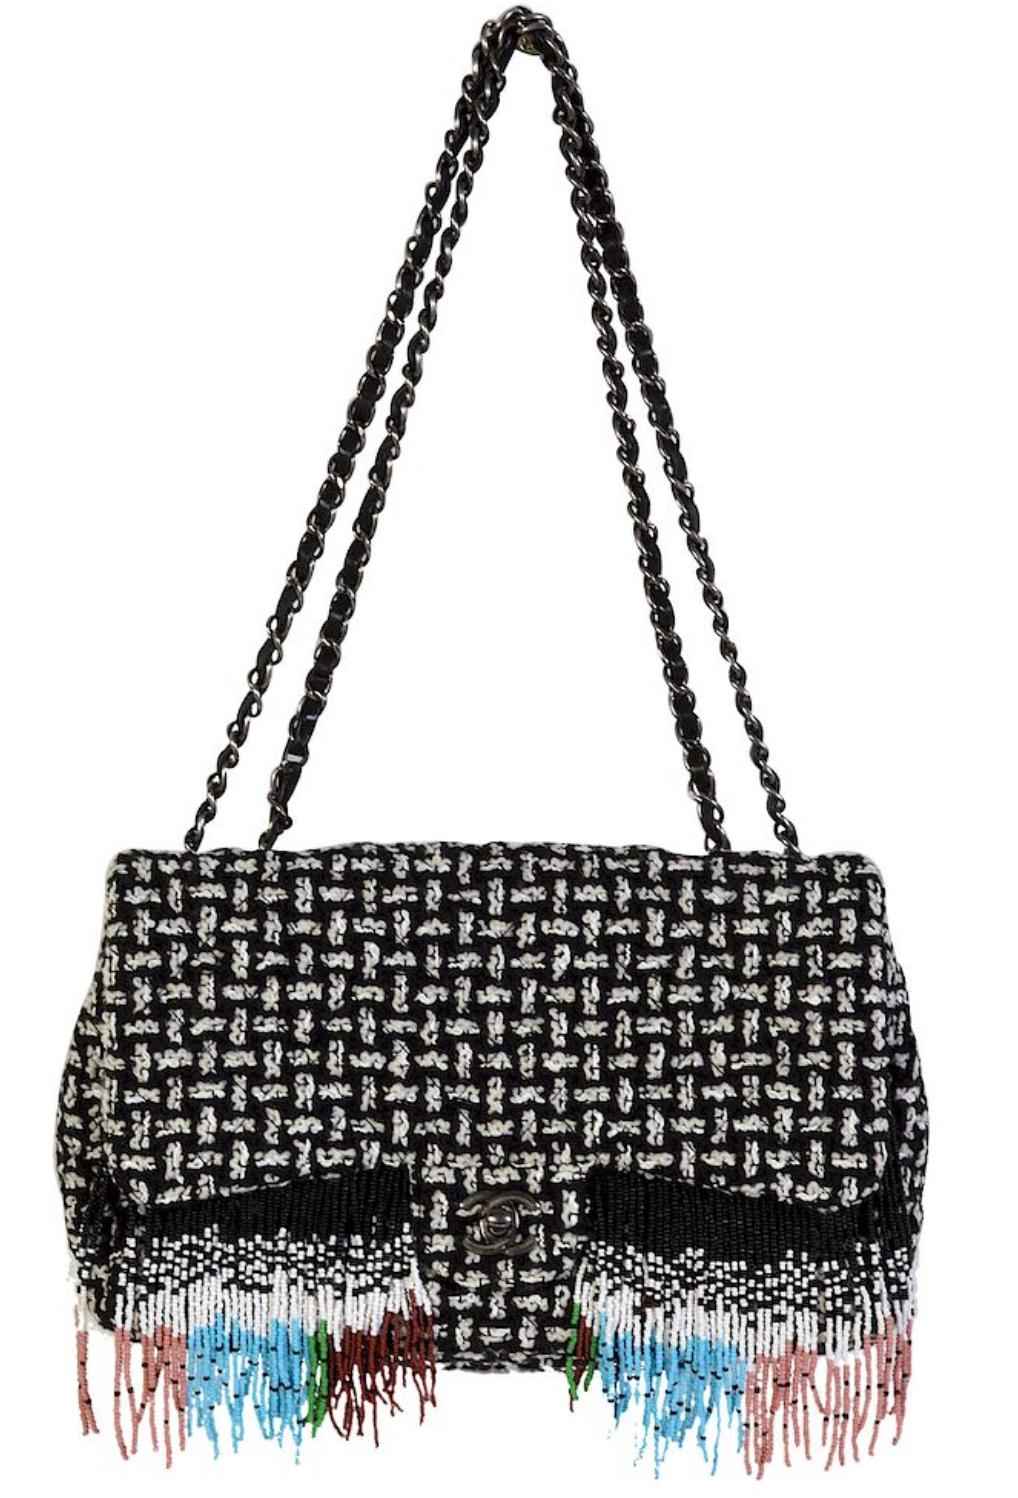 Chanel Dallas Metiers D'Art 2014 Tweed Fringe Rare Classic Flap 

Year: 2014

A unique classic flap bag in black and white tweed adorned with a multi-color seed bead fringe. The bag features a ruthenium chain strap and CC turnlock closure. It is